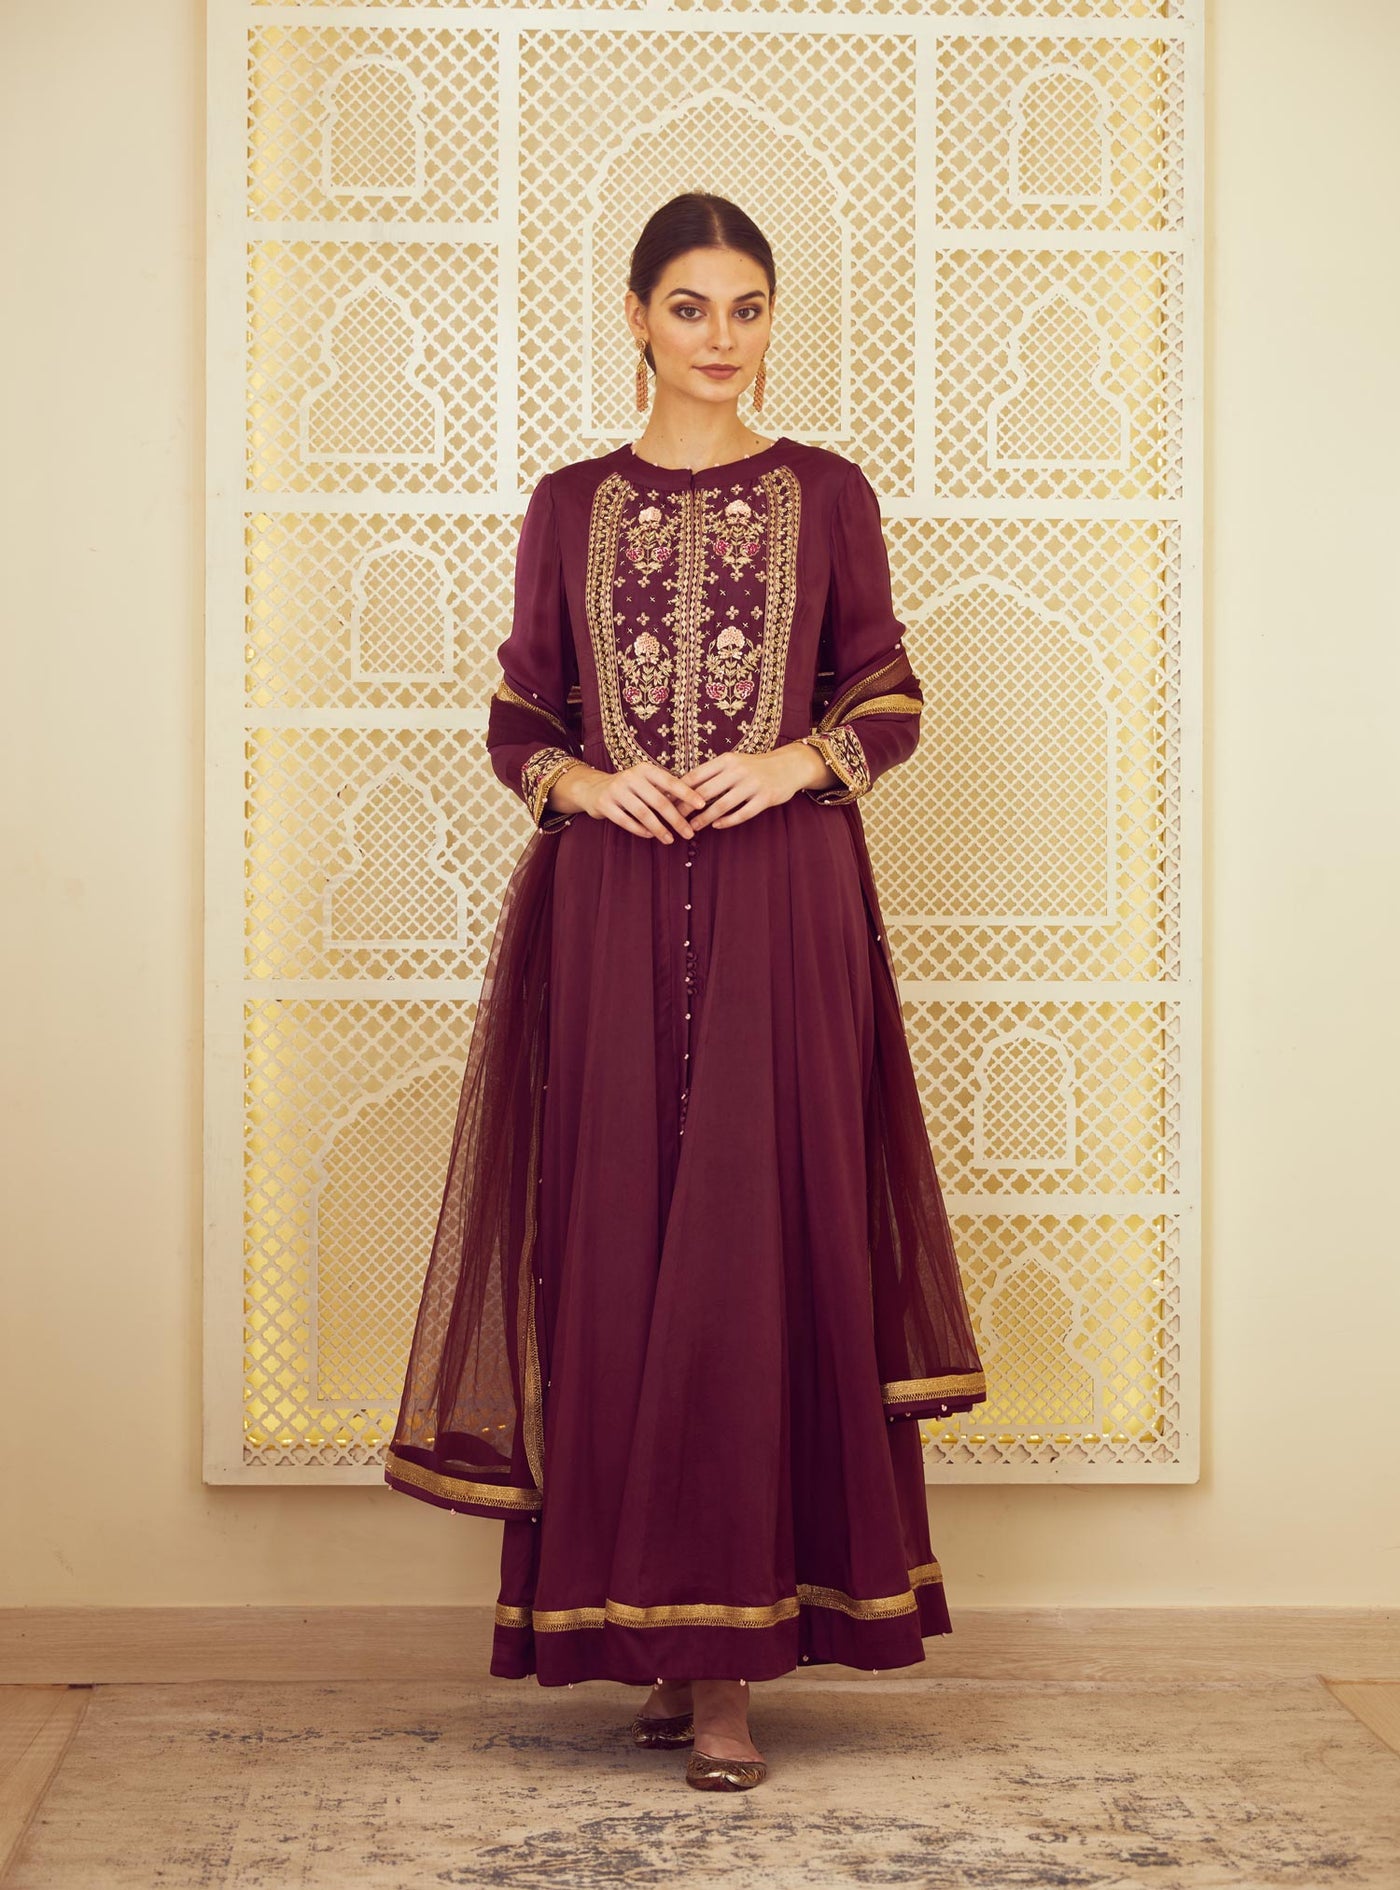 Wine Silk Anarkali Set Indian Clothing in Denver, CO, Aurora, CO, Boulder, CO, Fort Collins, CO, Colorado Springs, CO, Parker, CO, Highlands Ranch, CO, Cherry Creek, CO, Centennial, CO, and Longmont, CO. NATIONWIDE SHIPPING USA- India Fashion X